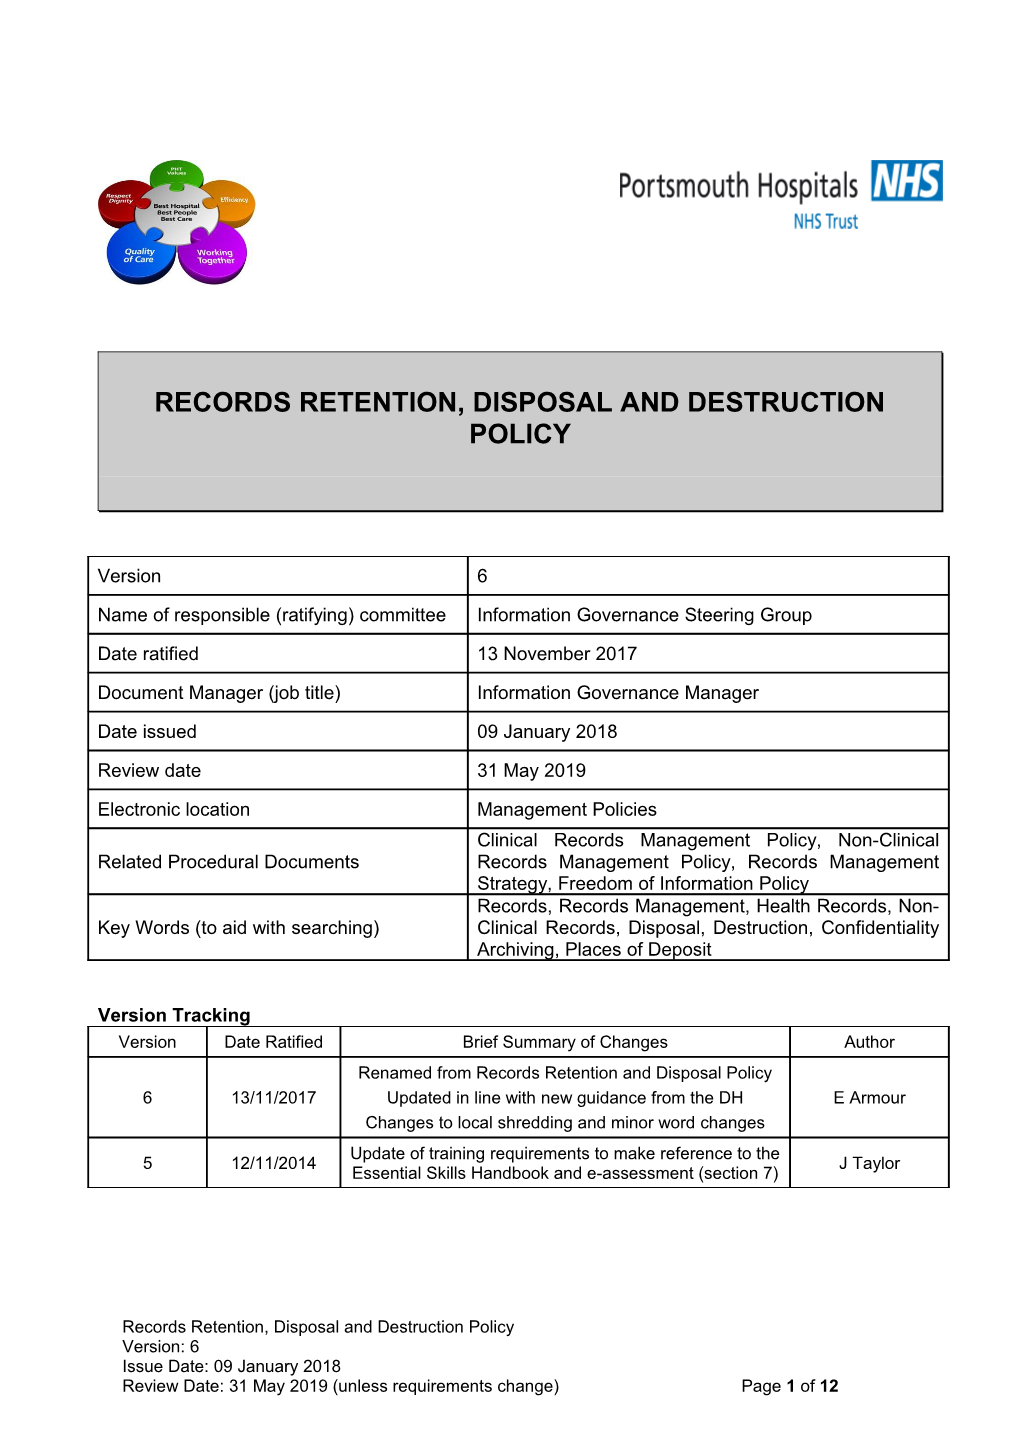 Records Retention, Disposal and Destruction Policy